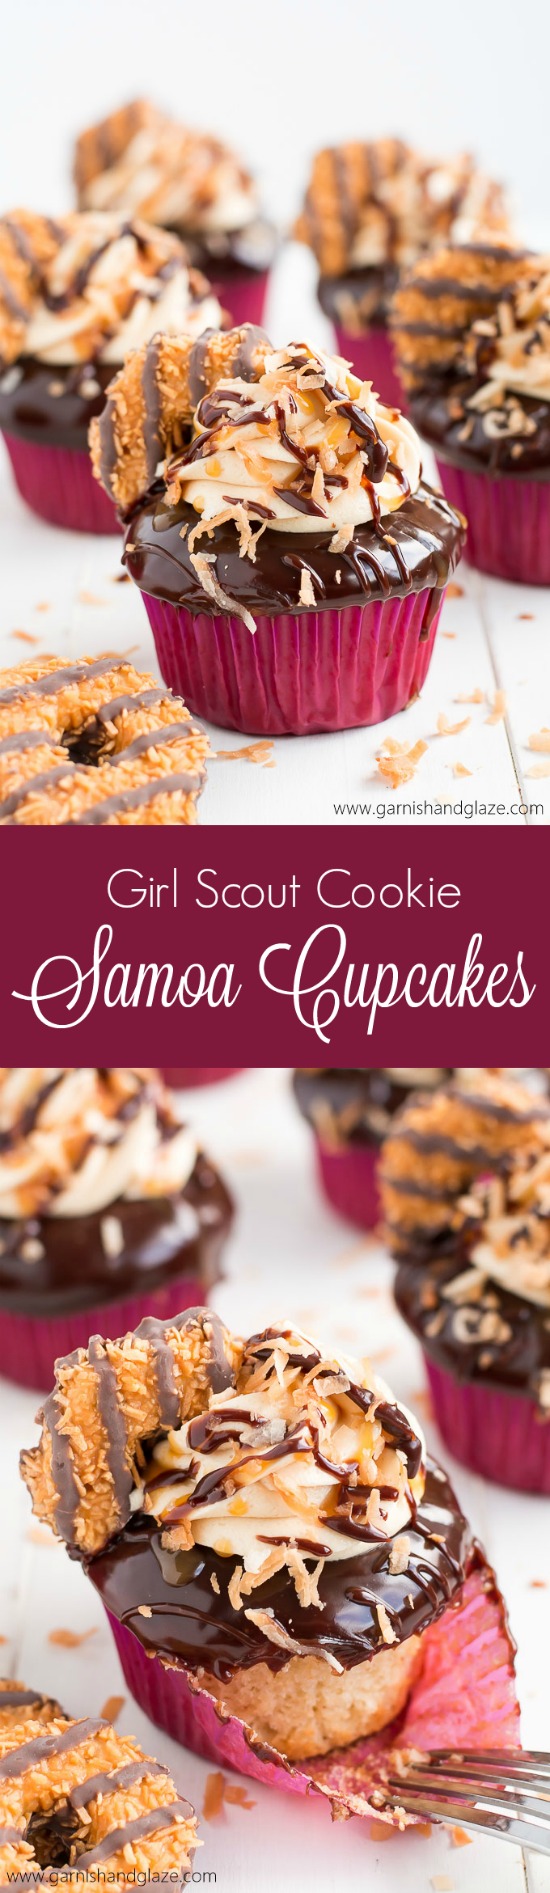  These Girl Scout Cookie Samoa Cupcakes are a rich chocolaty, caramel, and toasted coconut dream come true! 